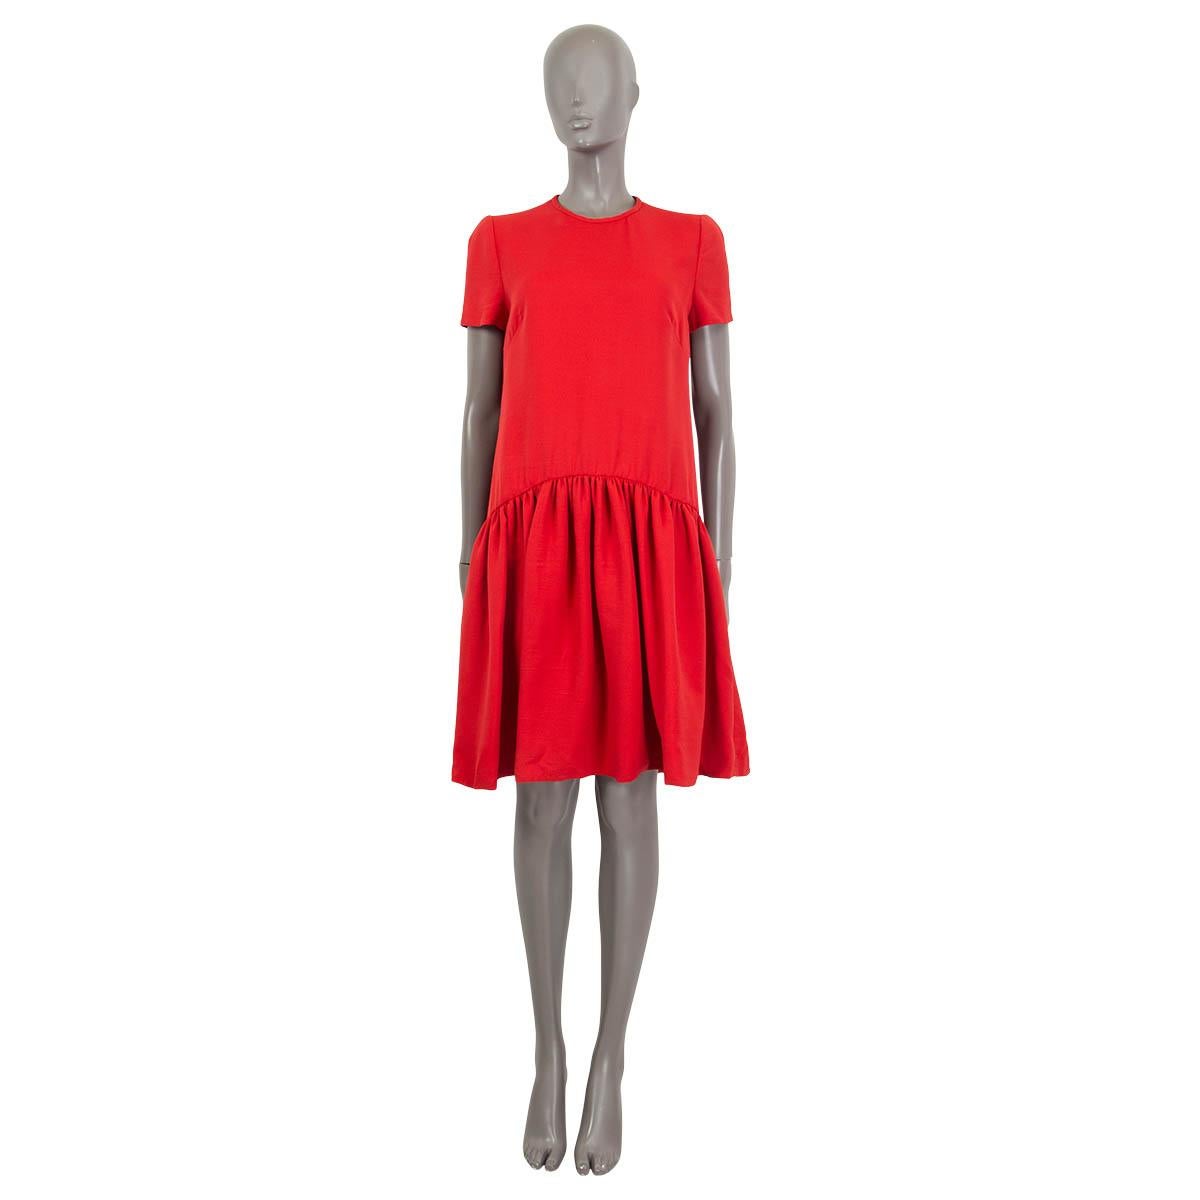 100% authentic Alexander McQueen drop-waist short sleeve dress in red wool (52%), polyamide (37%) and silk (11%). Opens with a concealed zipper and a hook at the back. Lined in red silk (100%). Has been worn and is in excellent